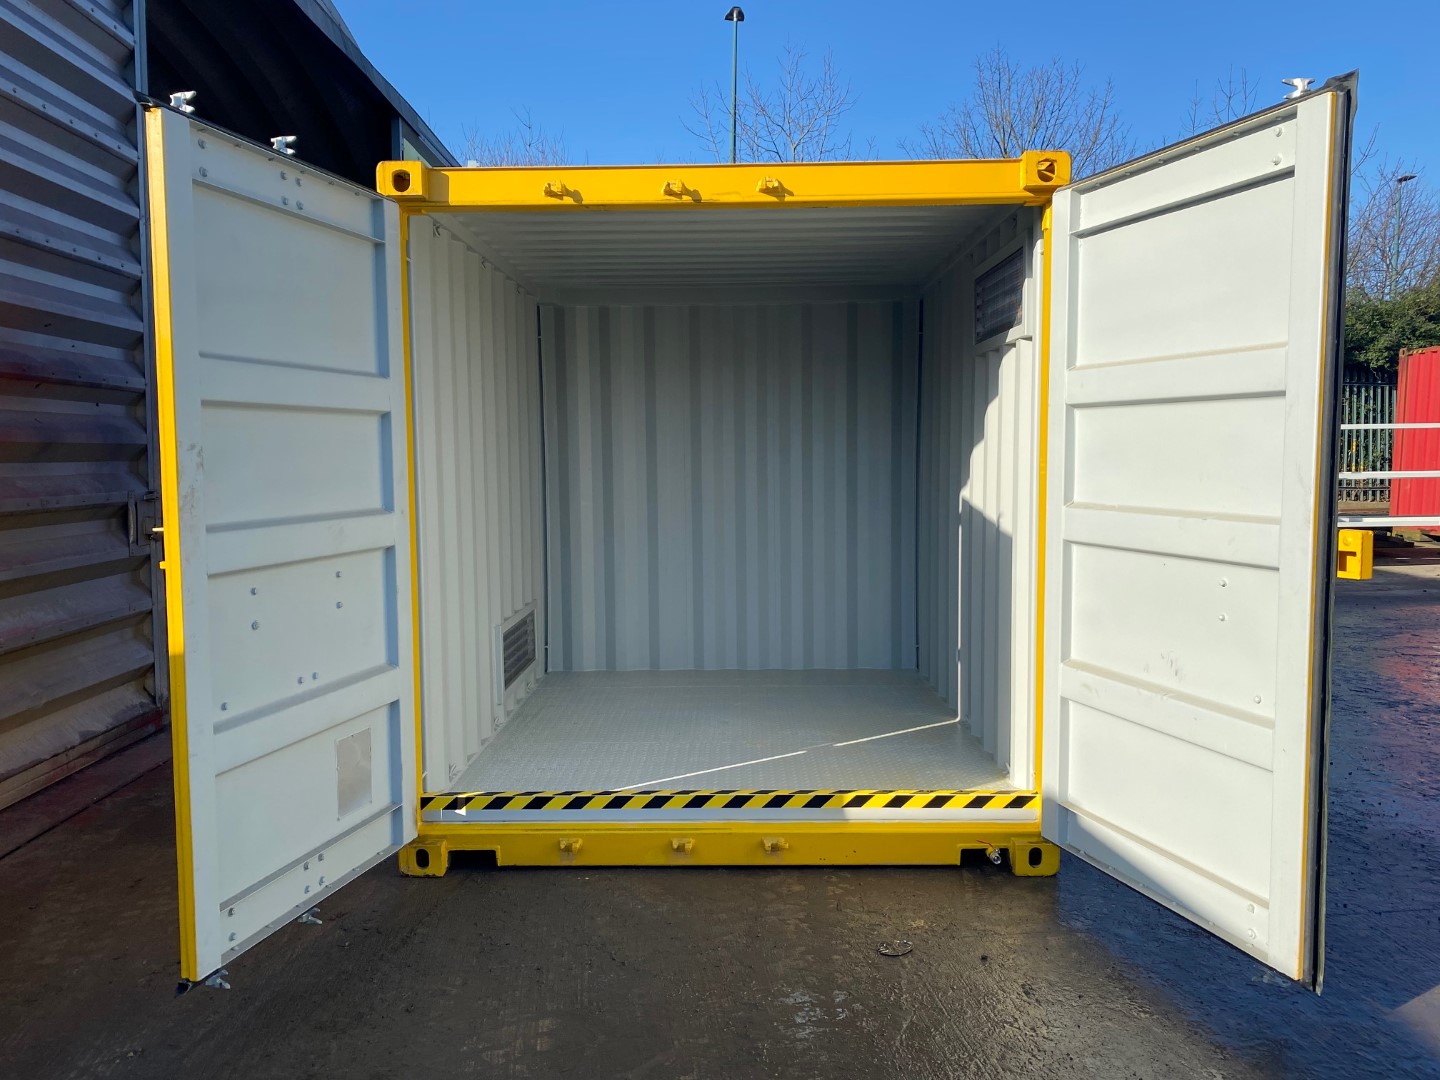 UK Providers of High-Security Chemical Storage Cabinets